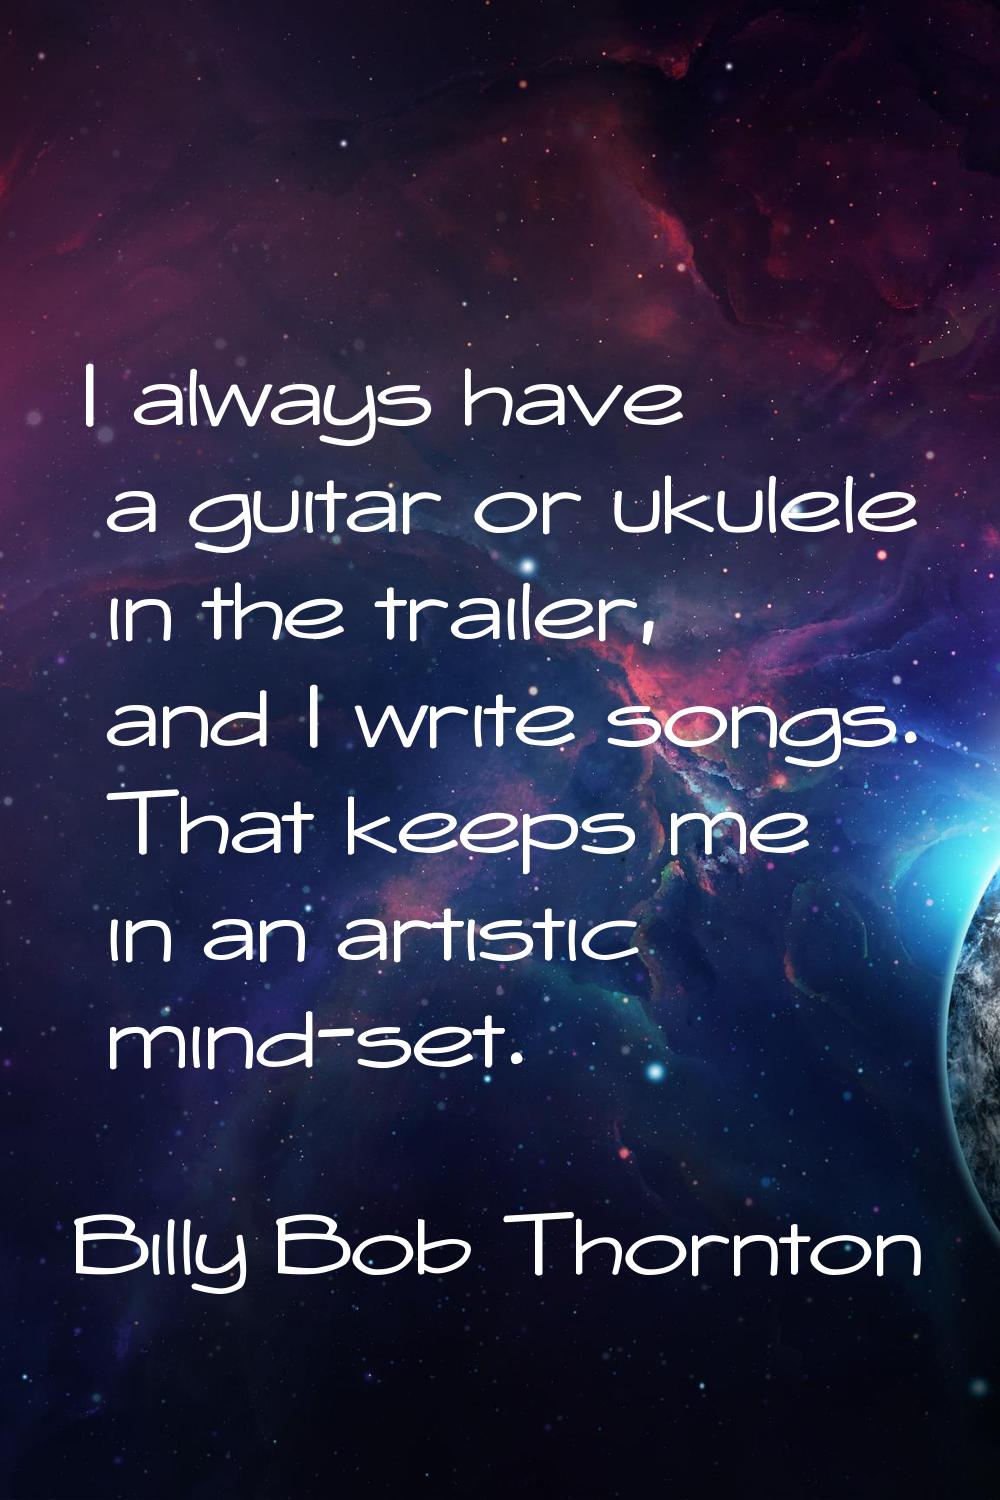 I always have a guitar or ukulele in the trailer, and I write songs. That keeps me in an artistic m